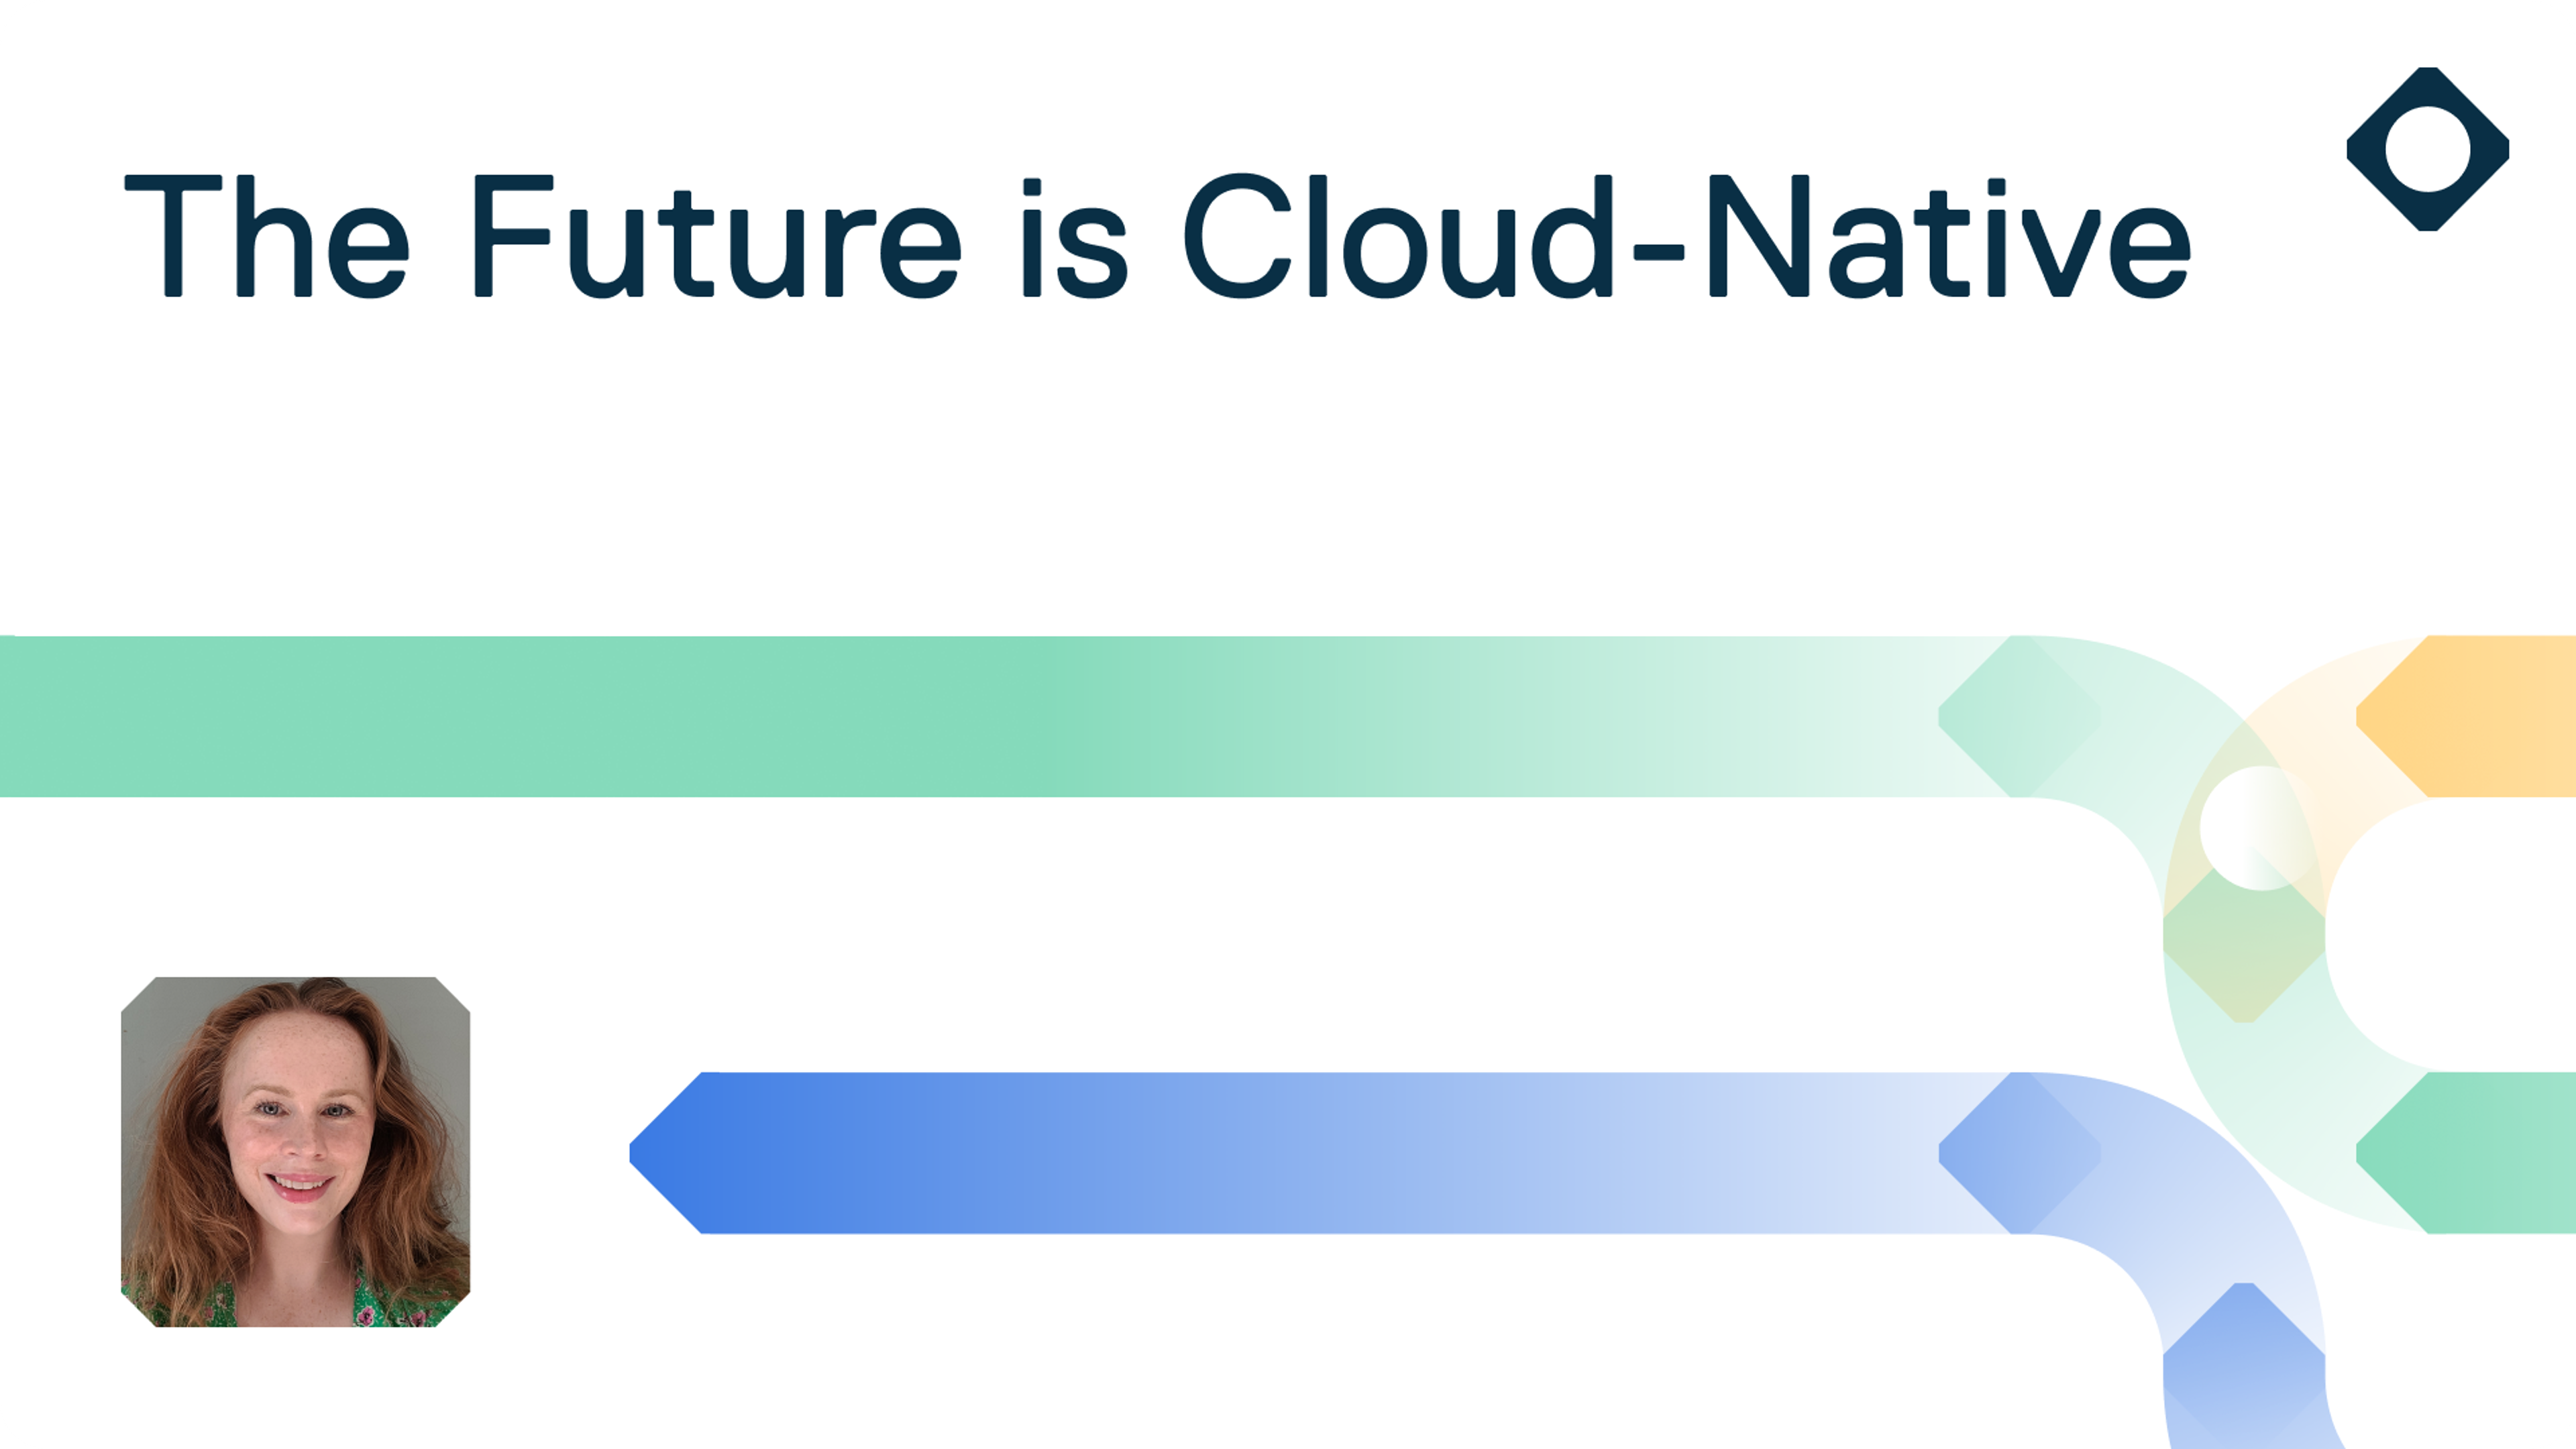 The Future is Cloud-Native